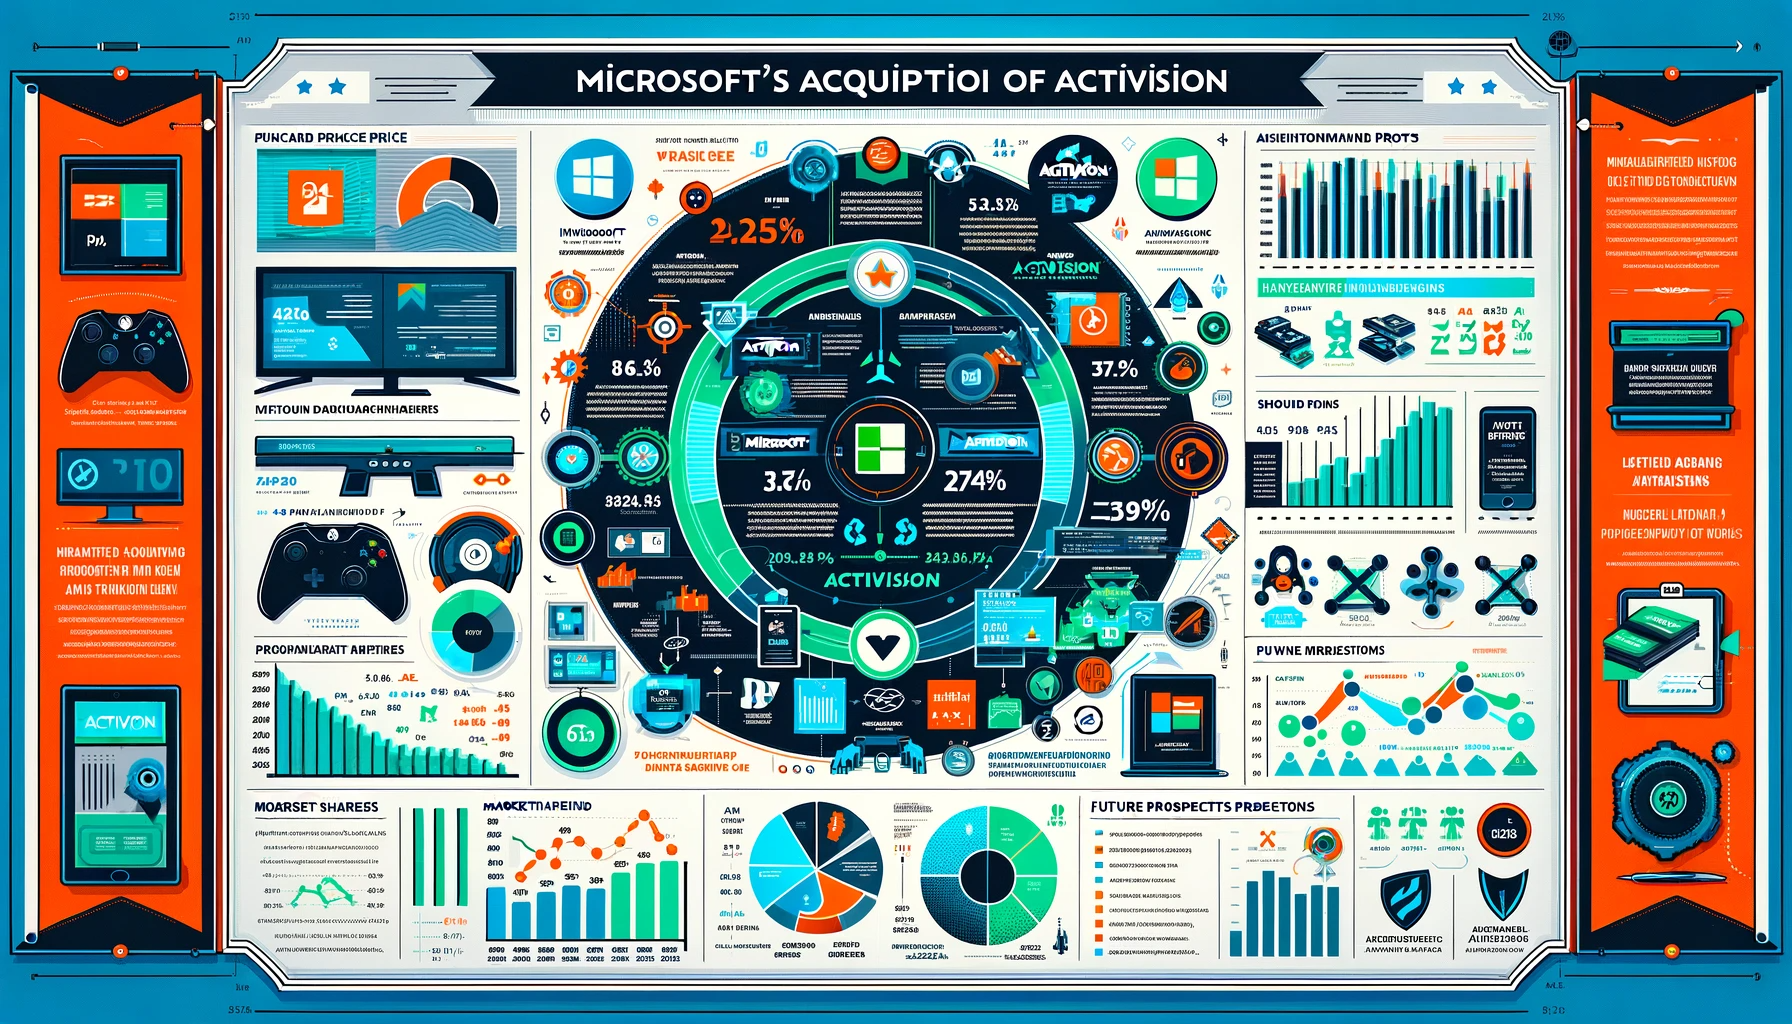 Microsoft Buying Activision: A Comprehensive Analysis